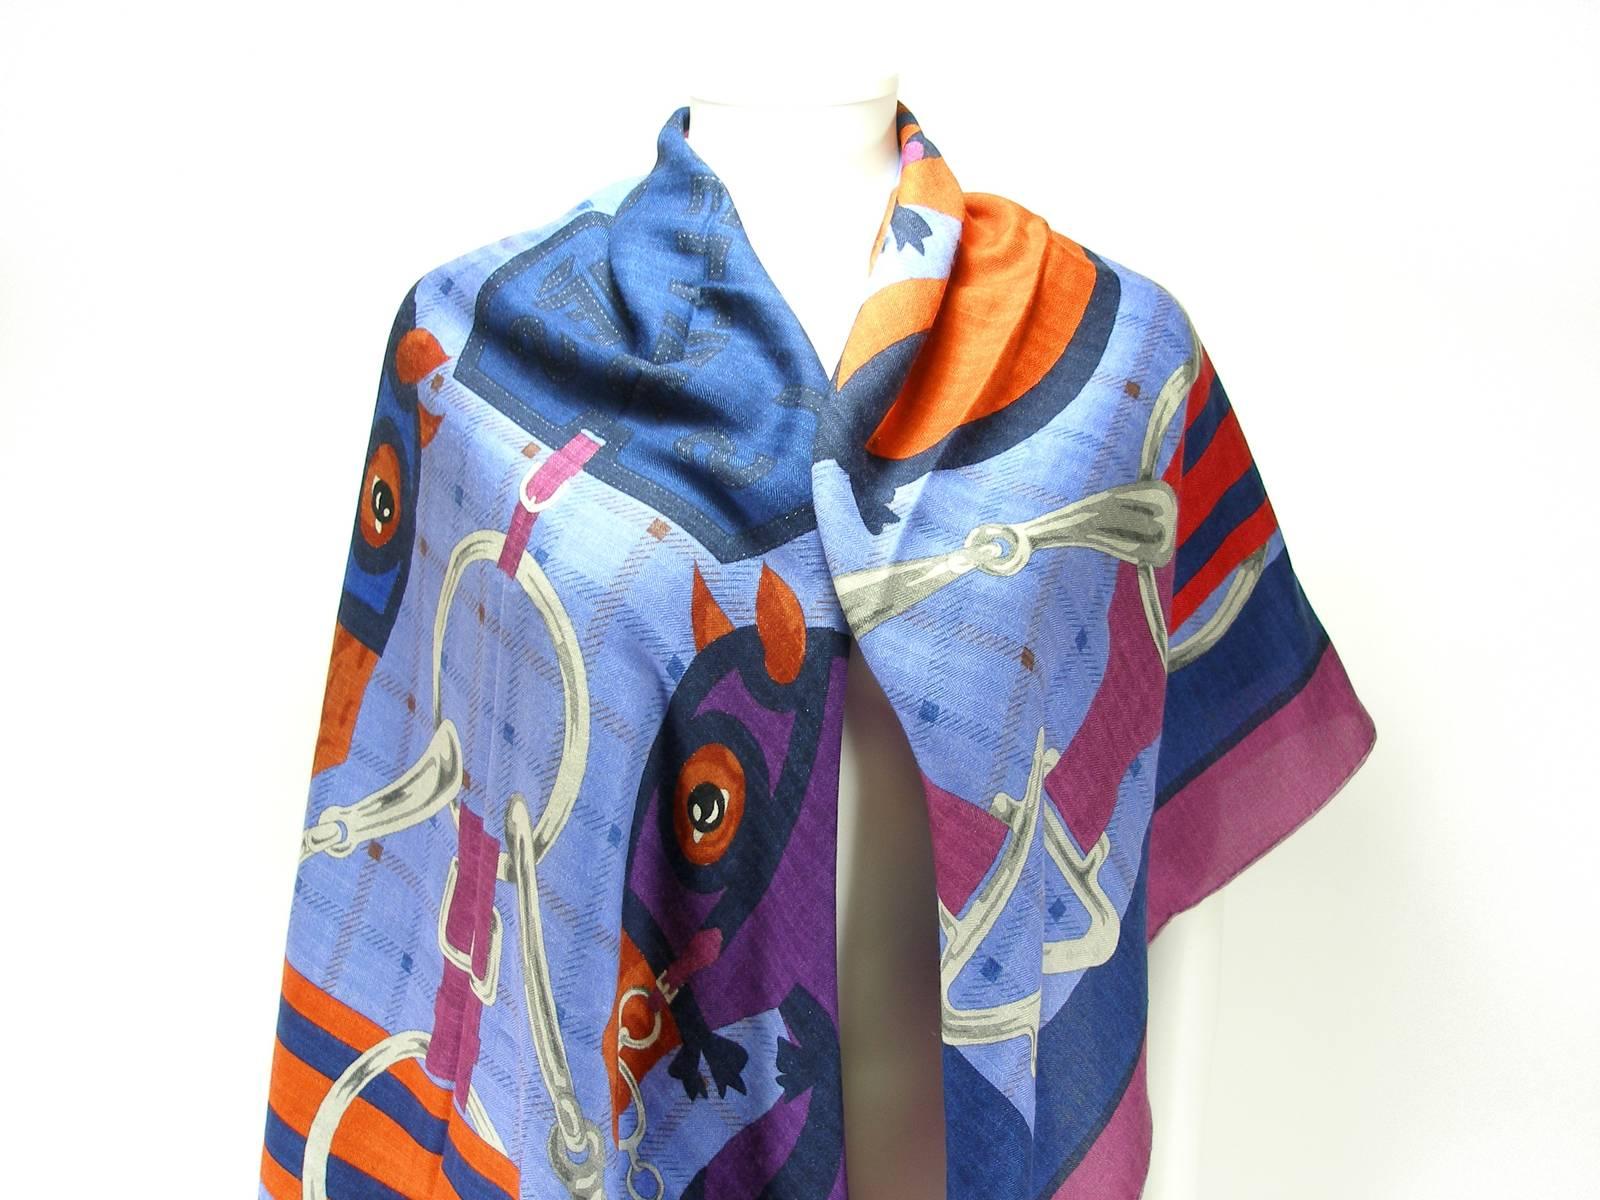 Hermès Tatersale
Silk 30% and cachemire 70%
Designed by Henri D'Origny
Actual Collection
Size 140 cm x 140 cm 
Copyright and Signature 
Color : Purple / multicolor
Sorry no Box
Thank you for visiting my shop !